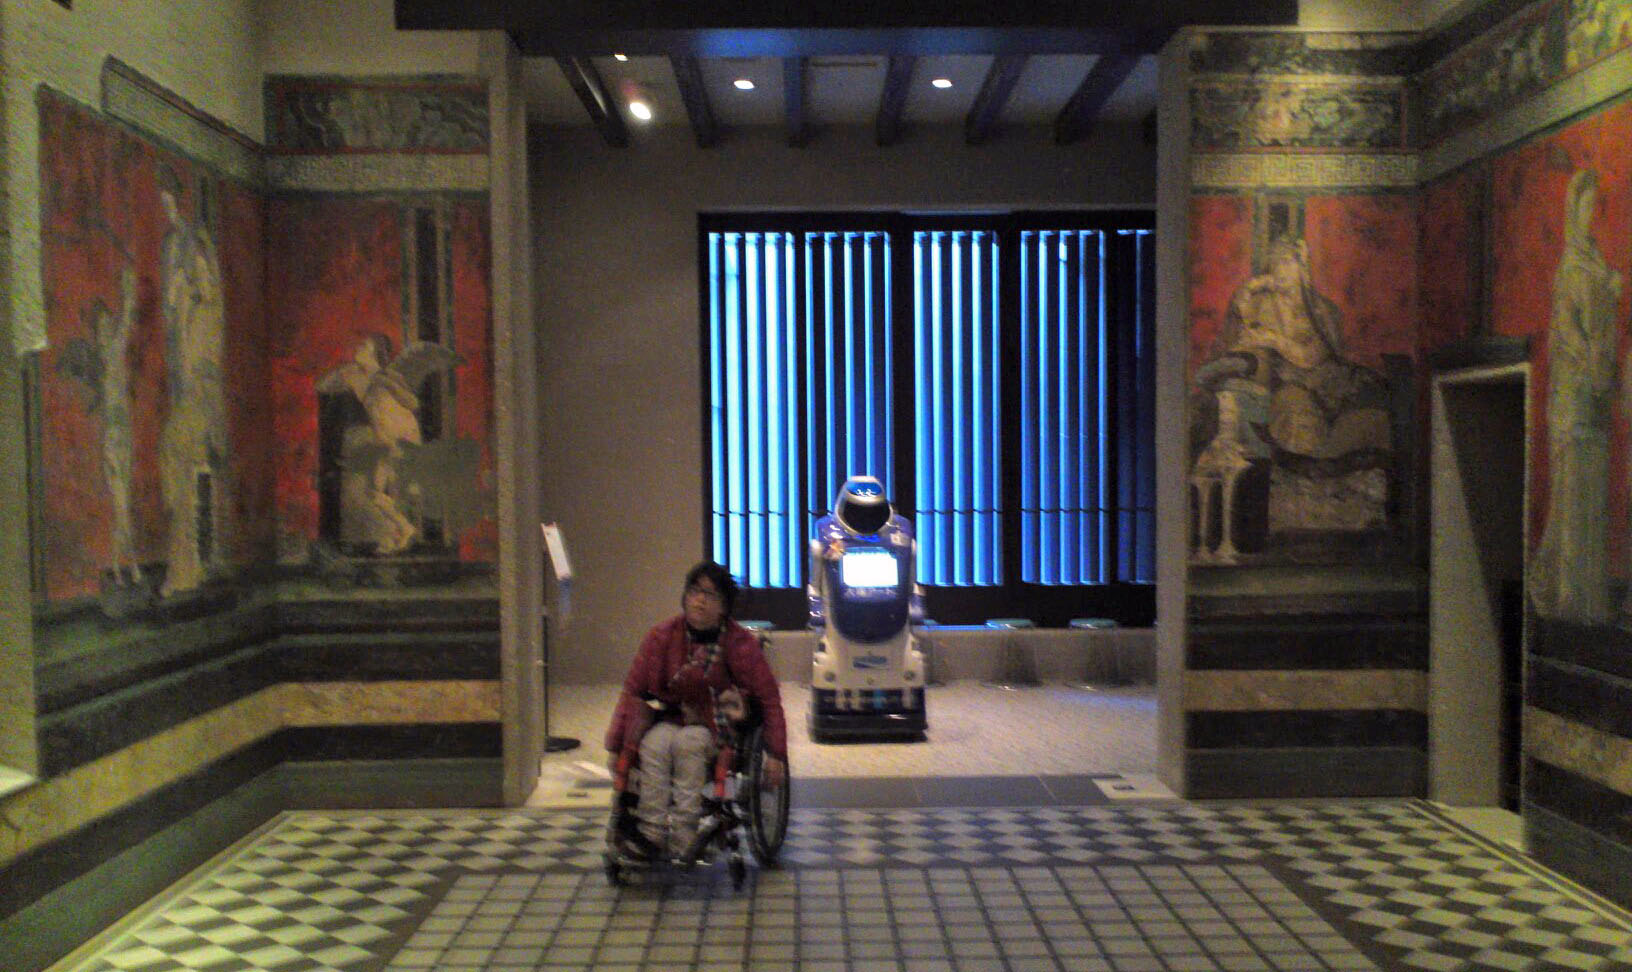 Wheelchair Travels with my daughter